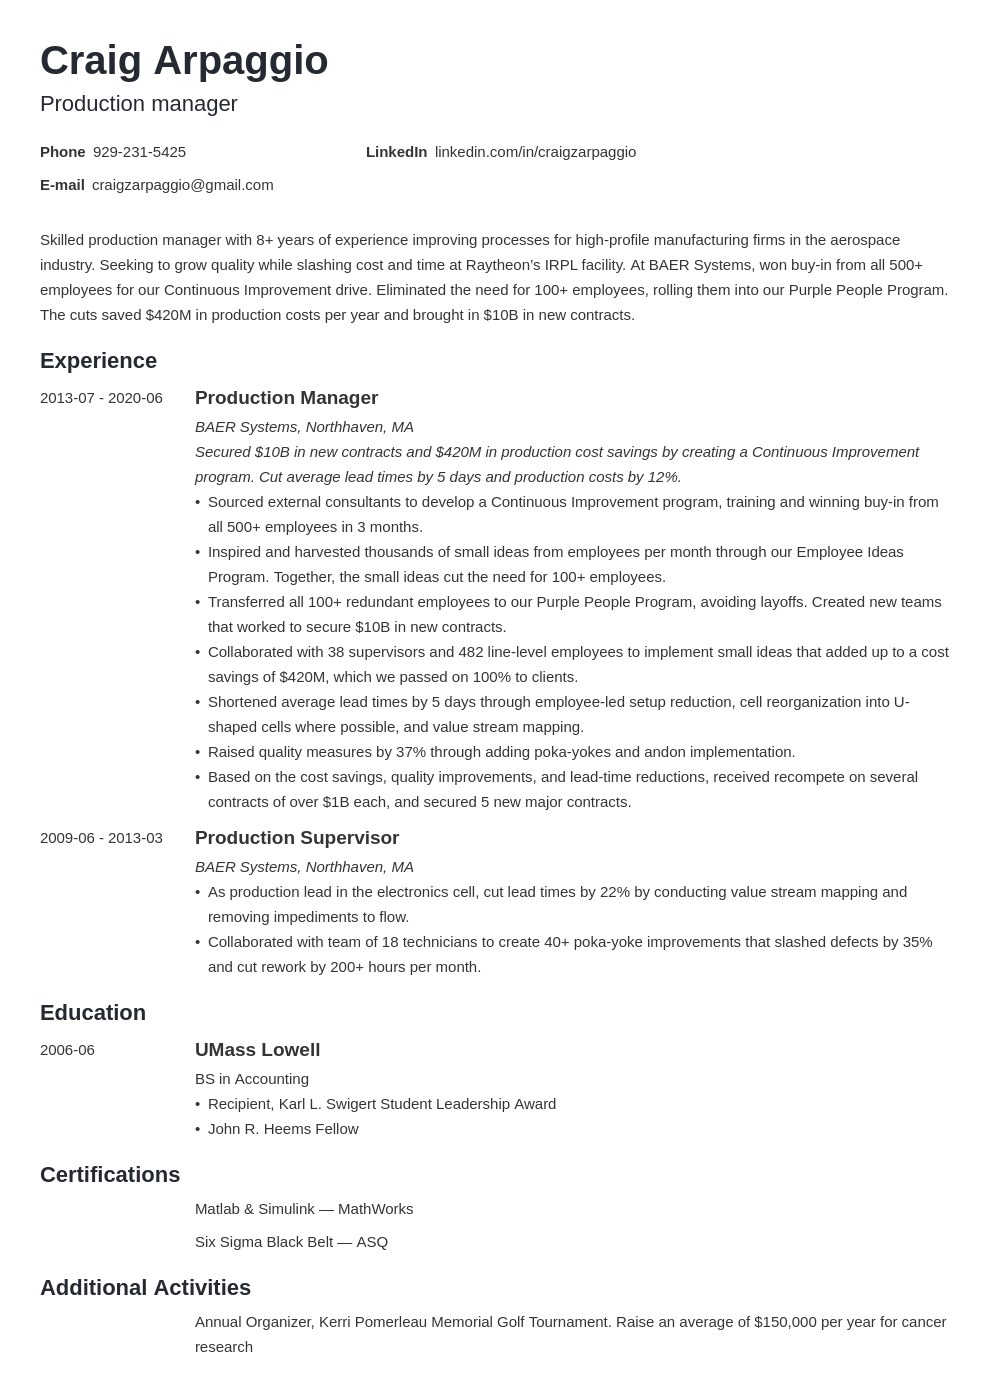 Production Manager Resume Examples And Guide 10 Tips